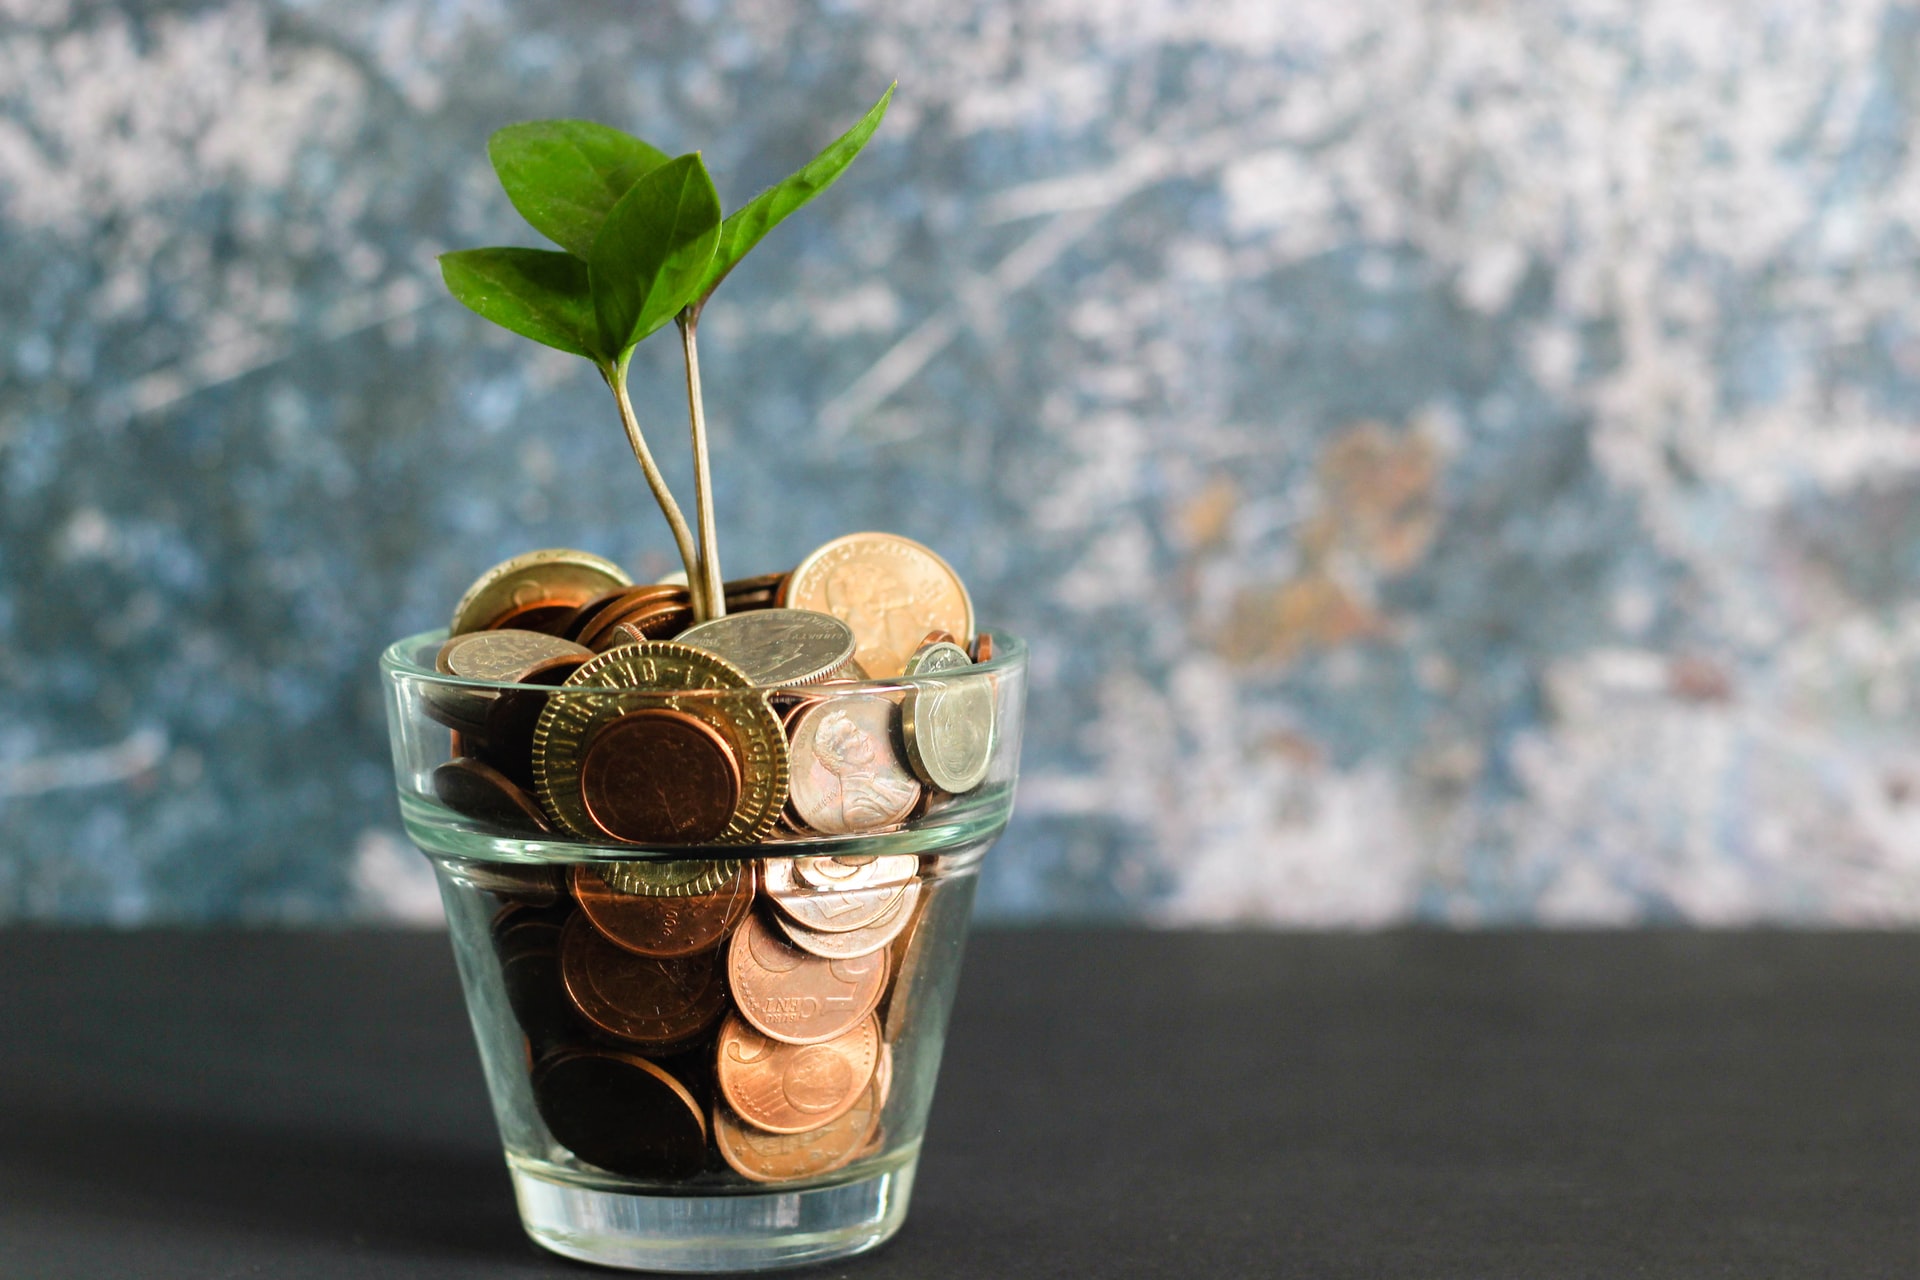 How to raise venture capital for your Green Business